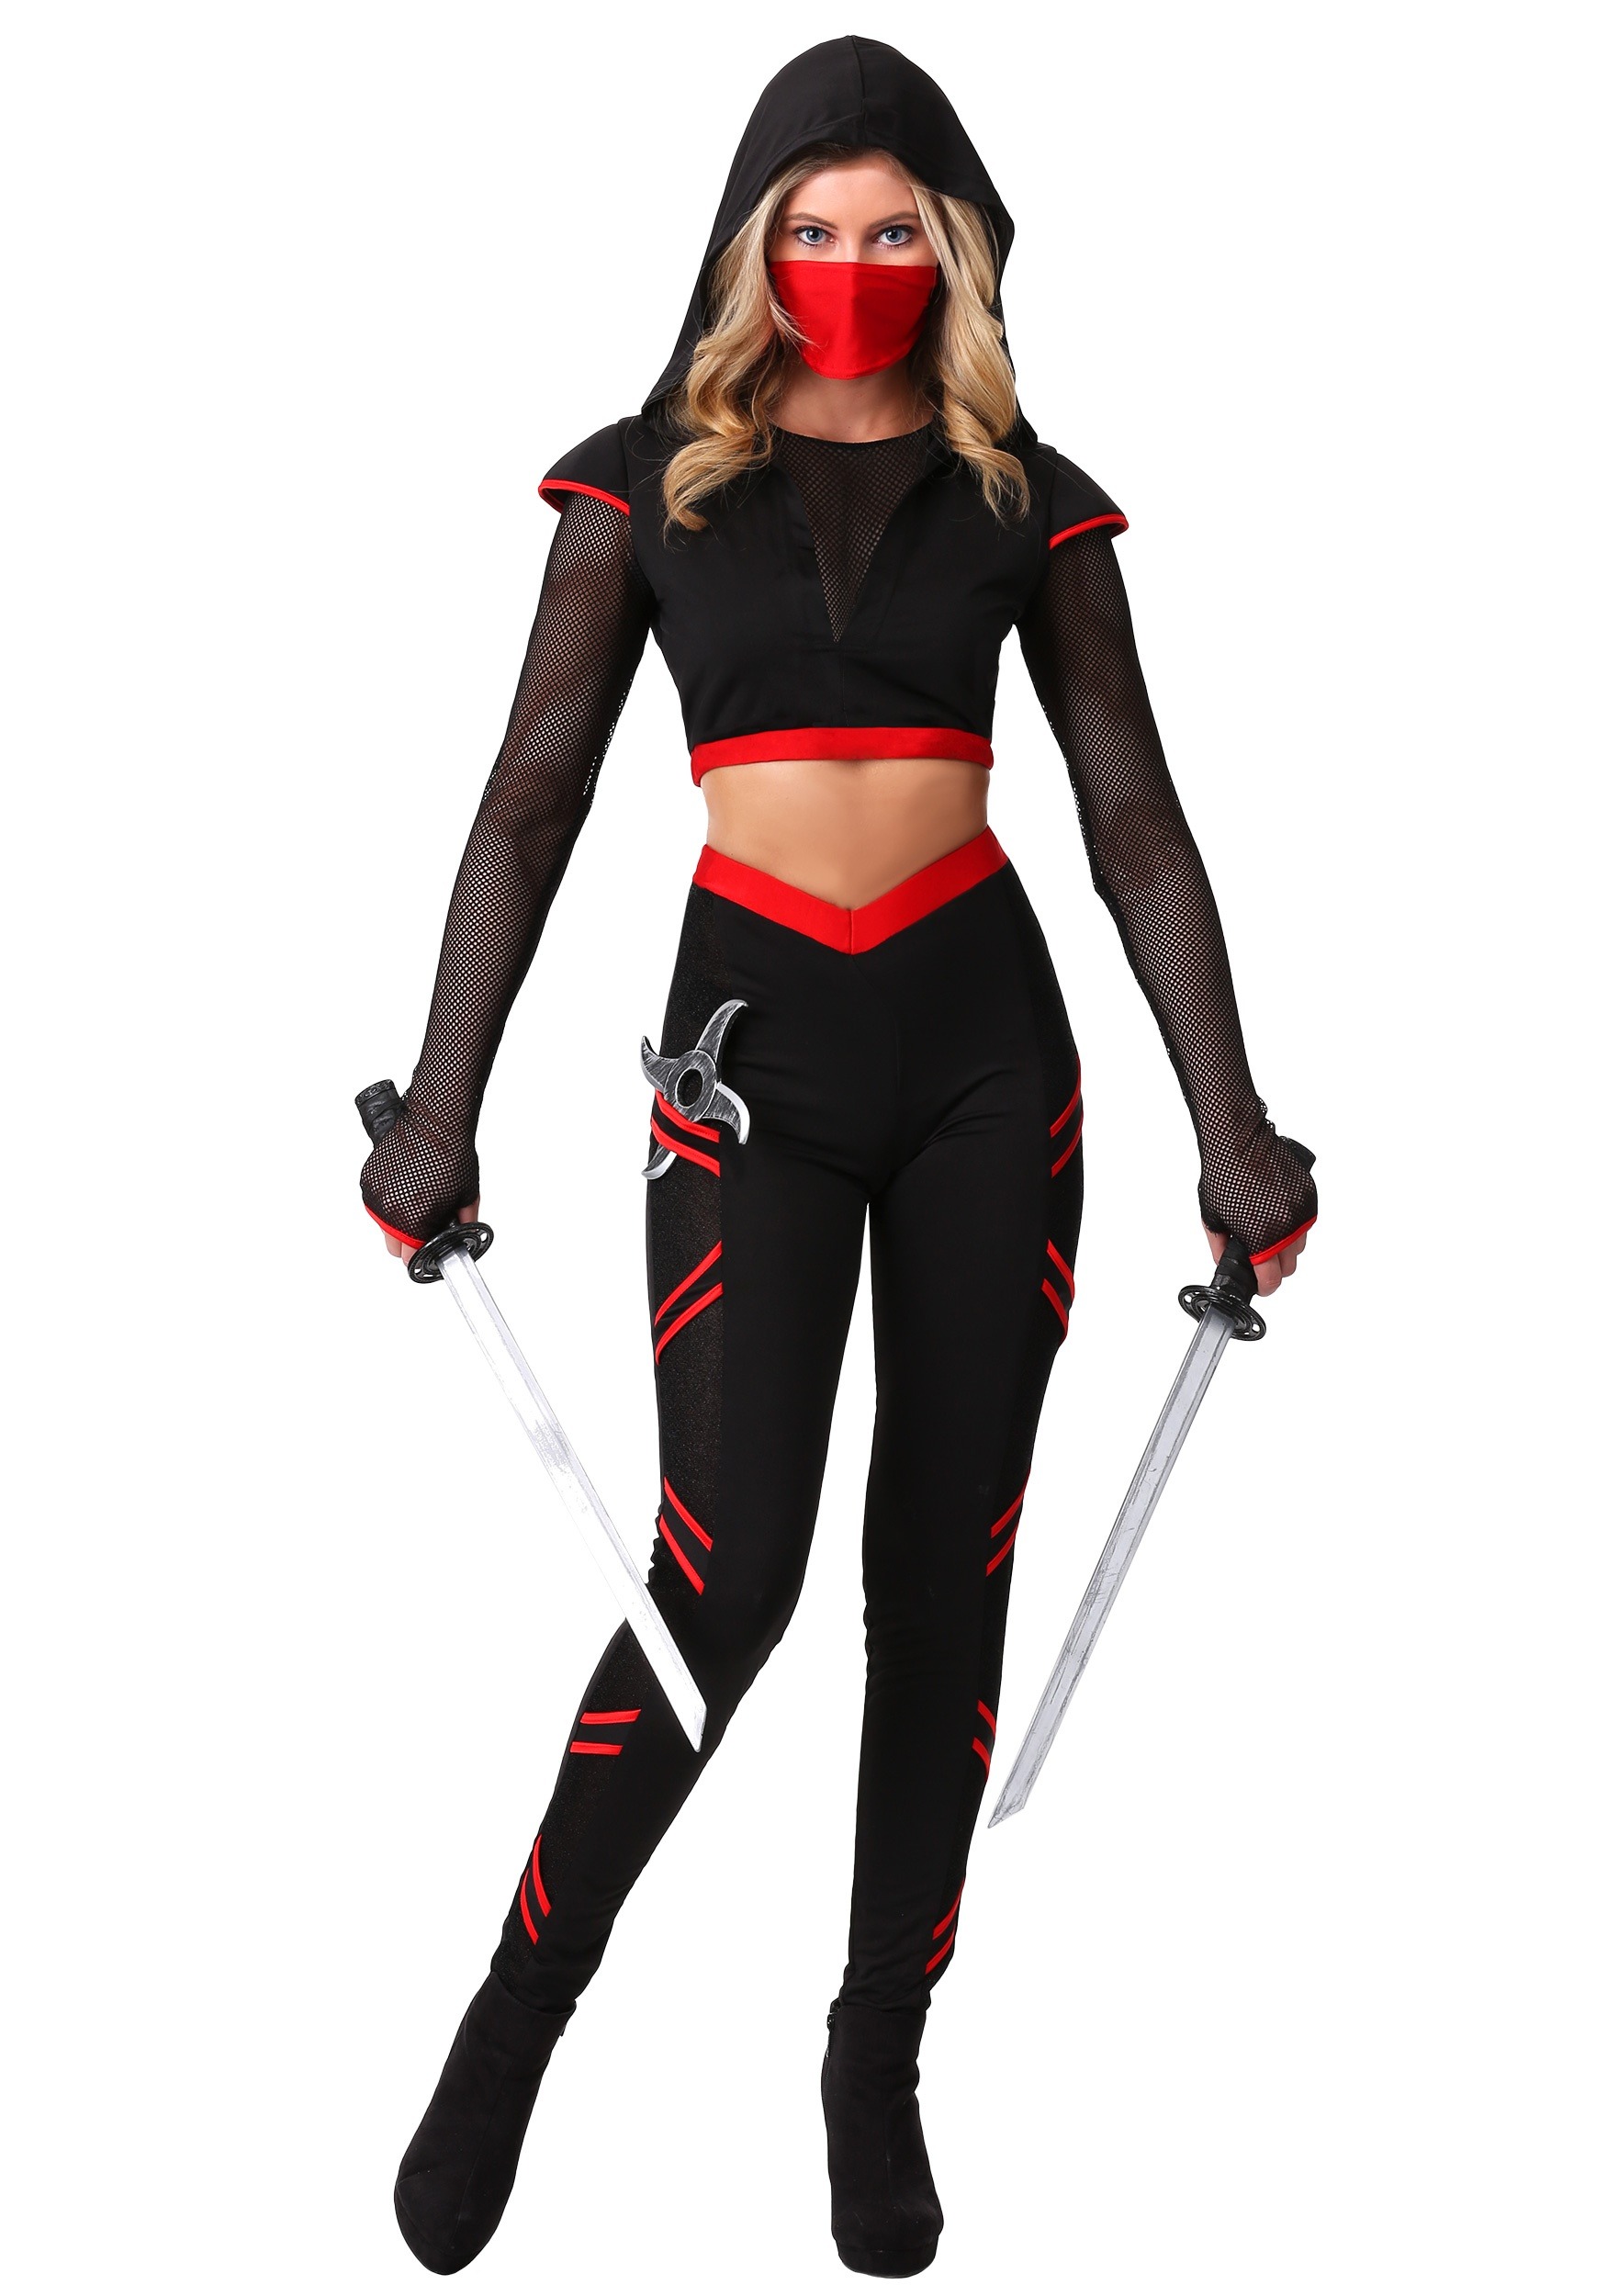 https://images.halloweencostumes.ca/products/44296/1-1/womens-alluring-assassin-costume.jpg